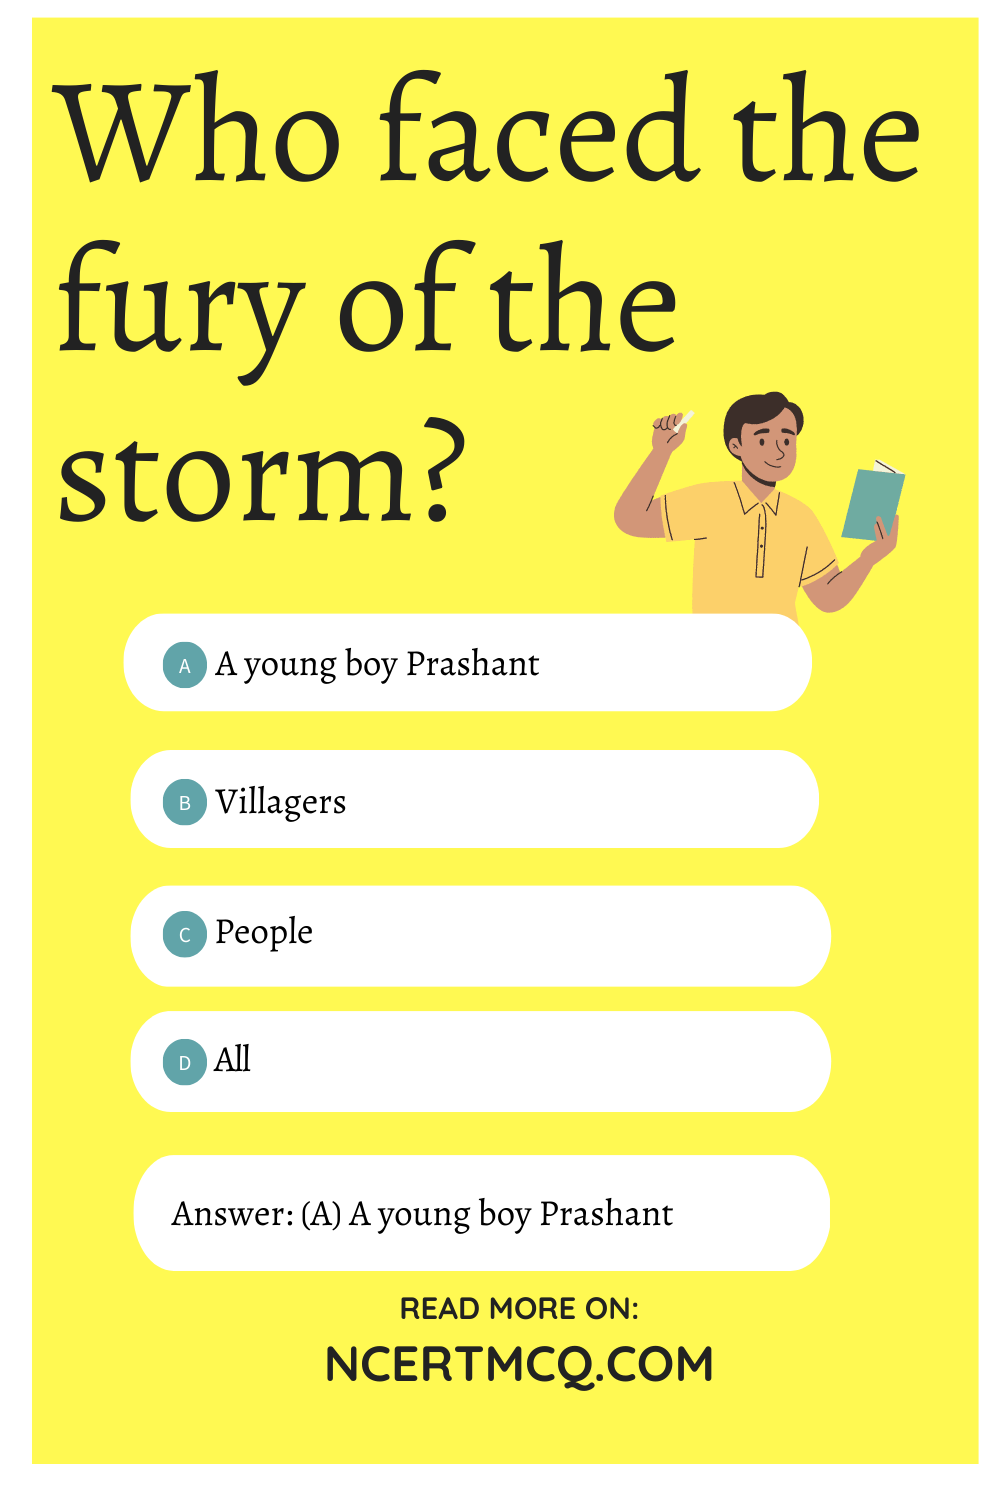 Who faced the fury of the storm?